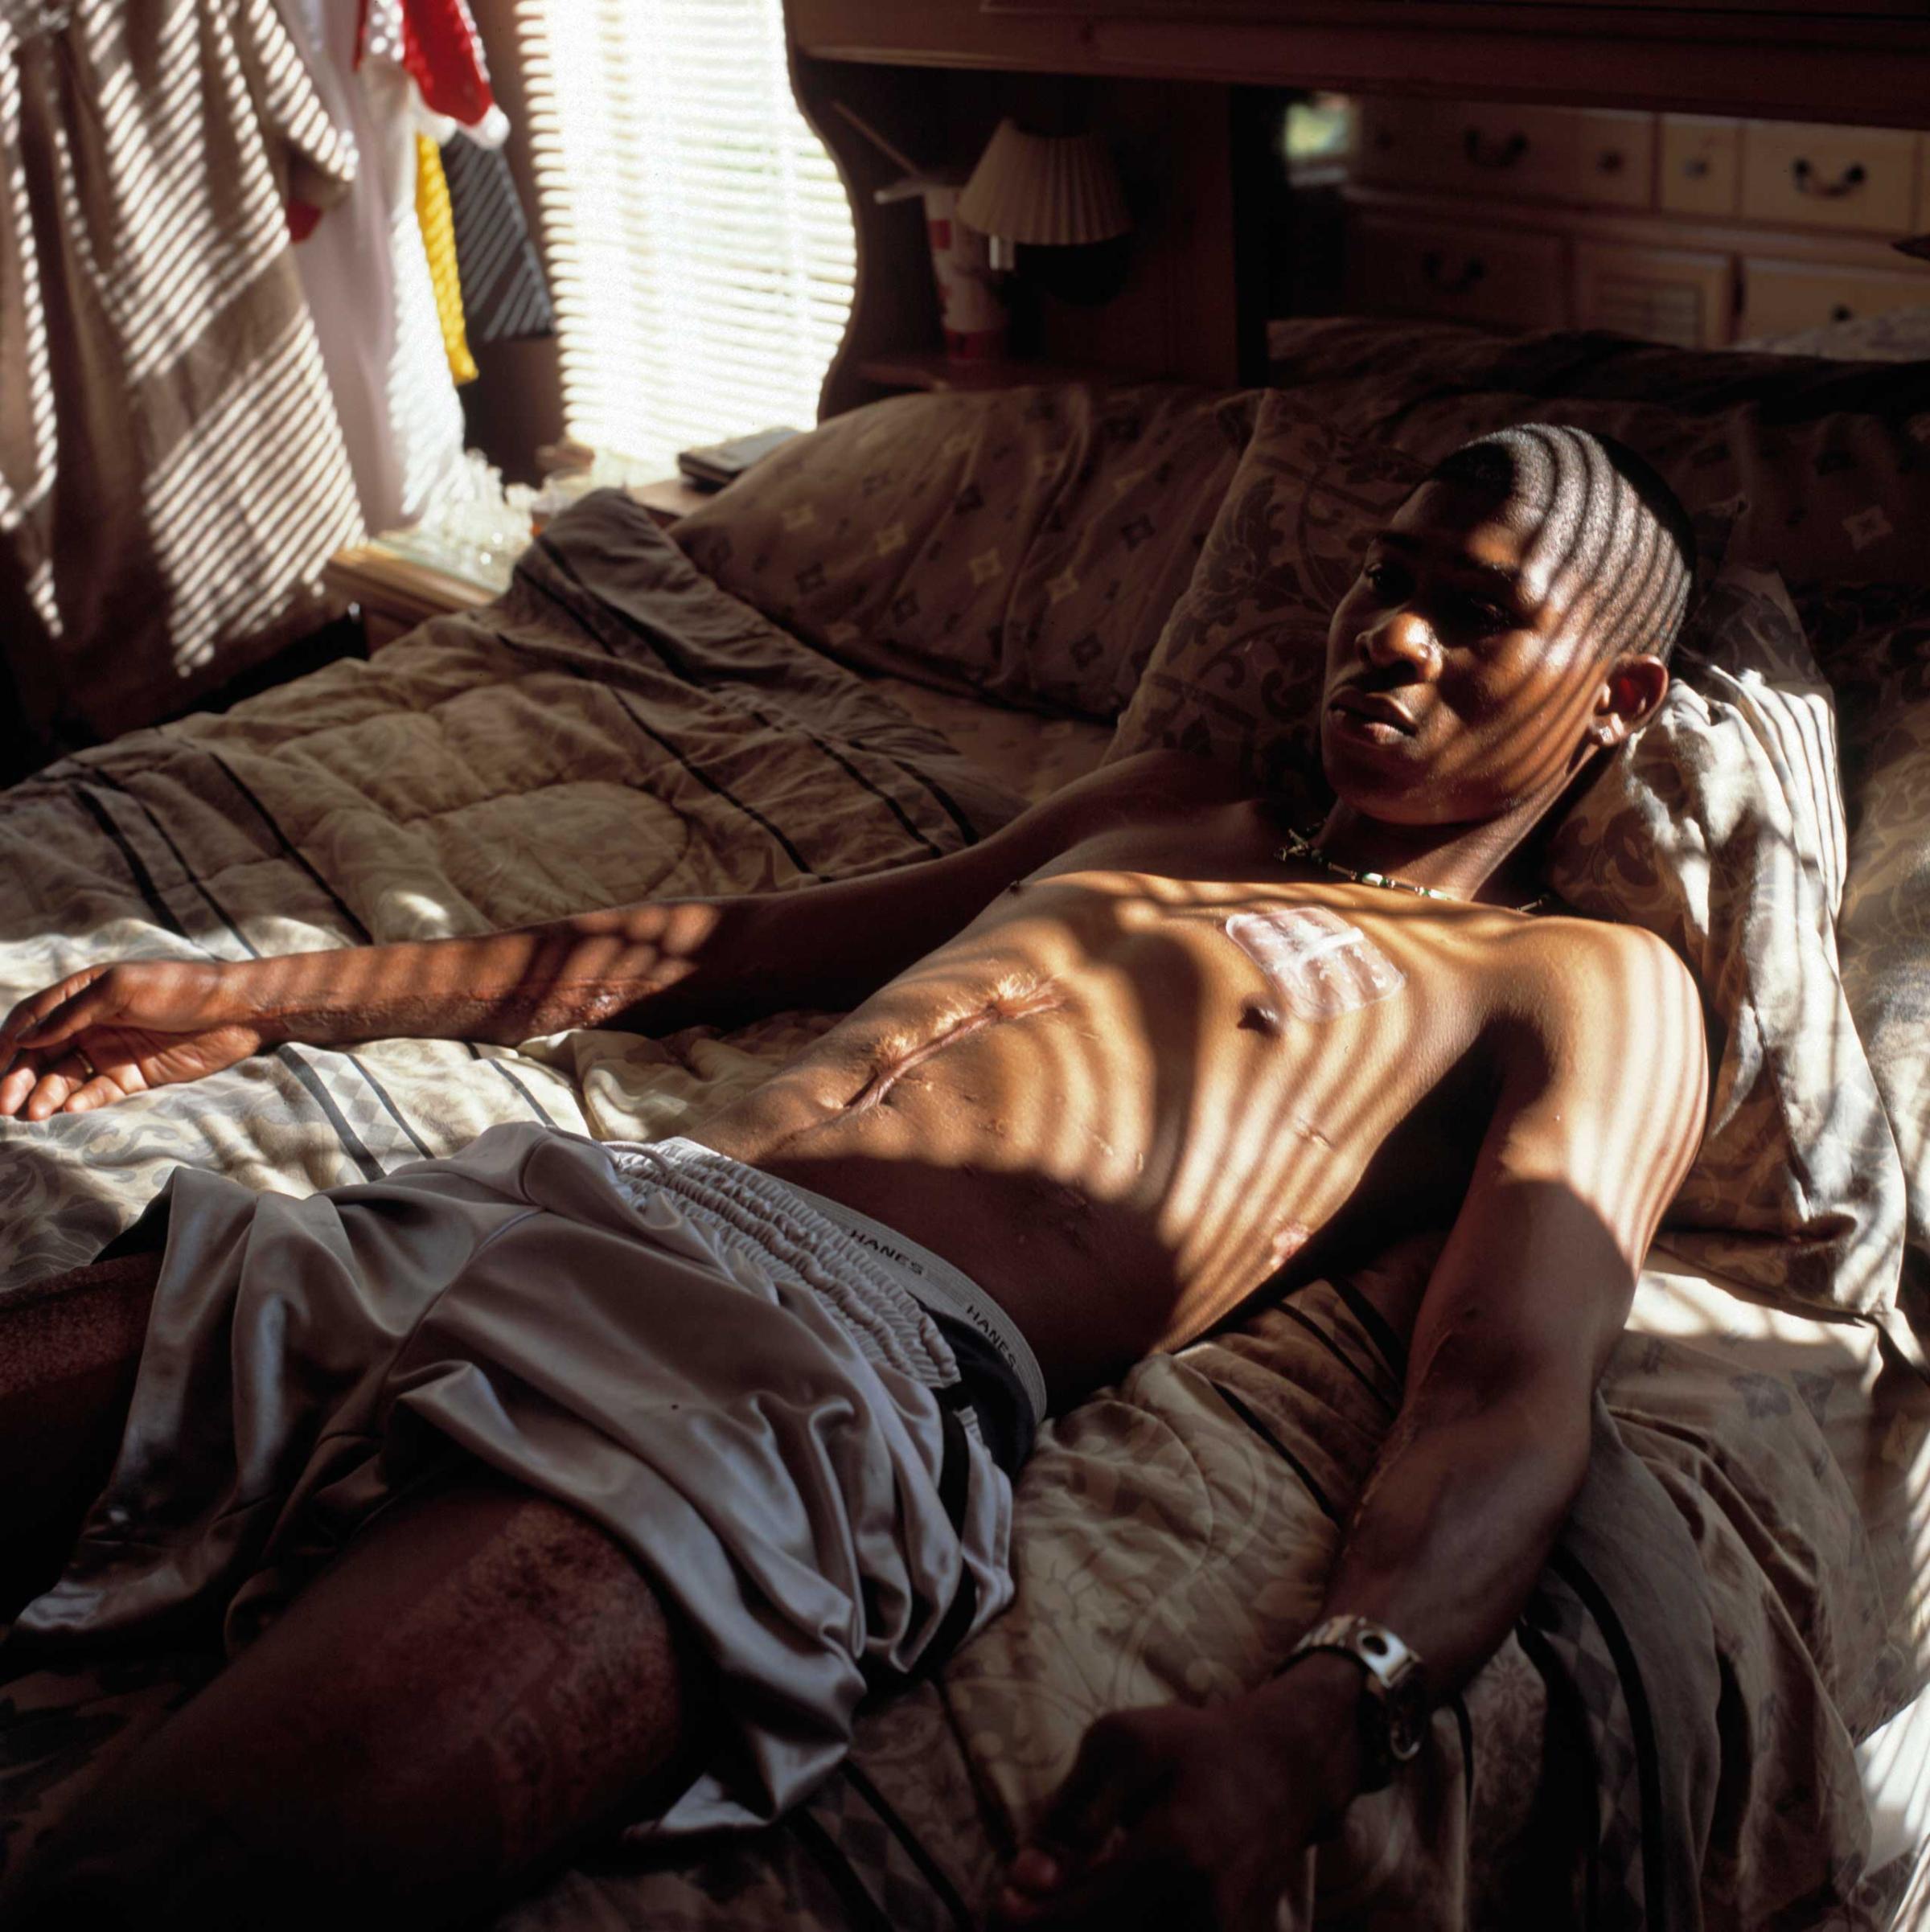 Tyson Johnson III, 22, a corporal and mechanic with Military Intelligence at the Abu Ghraib prison in Baghdad, was injured in a mortar attack. He suffered massive internal injuries. Photographed at his home in Prichard, Alabama,  May 6, 2004.